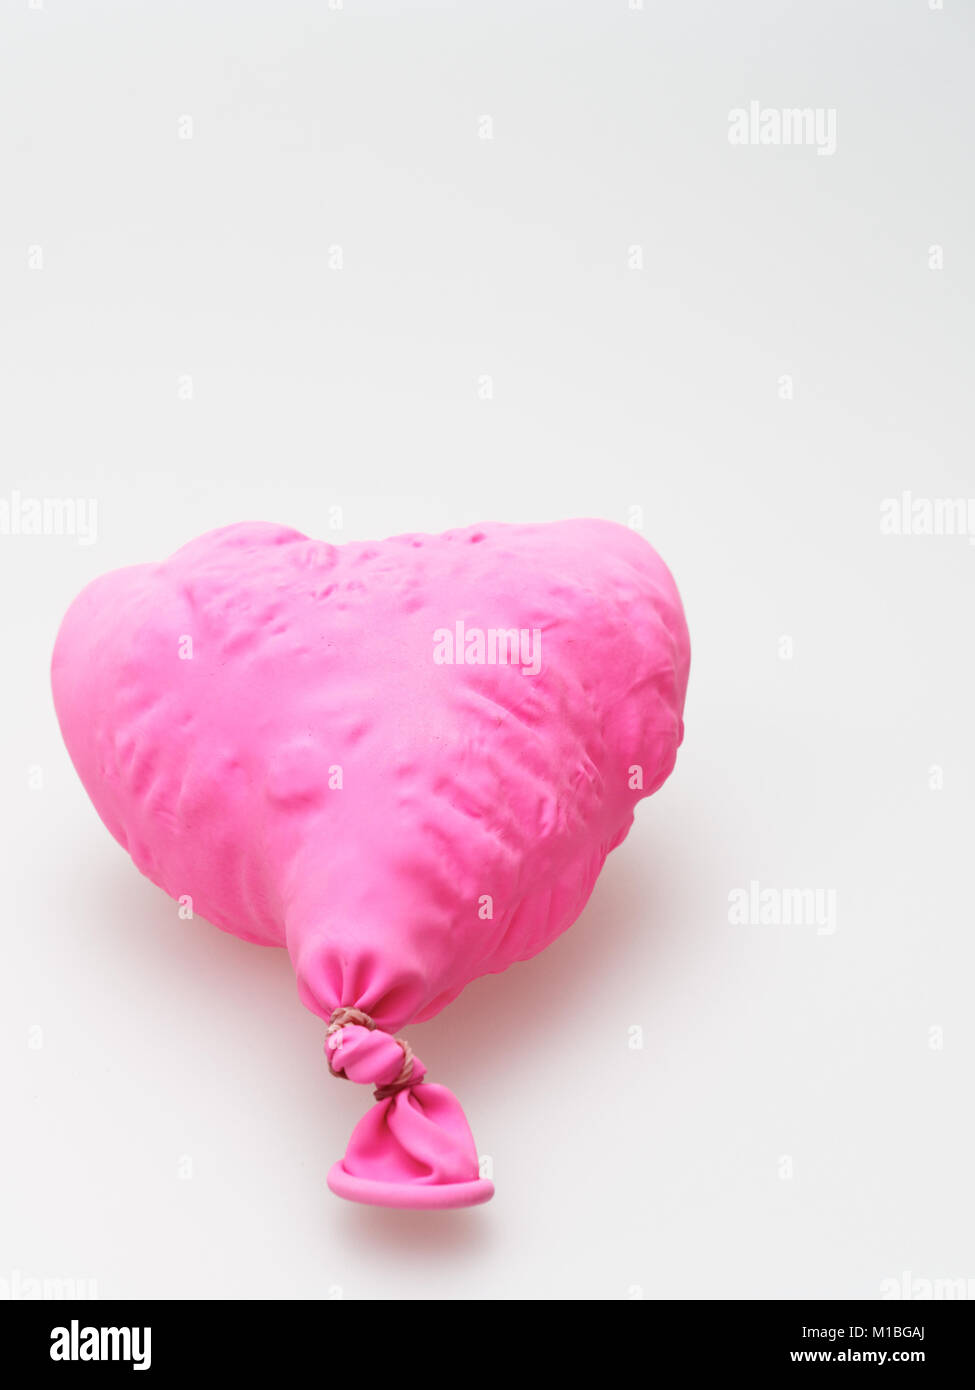 Deflate heart shape balloon in pink color isolated on white background Stock Photo